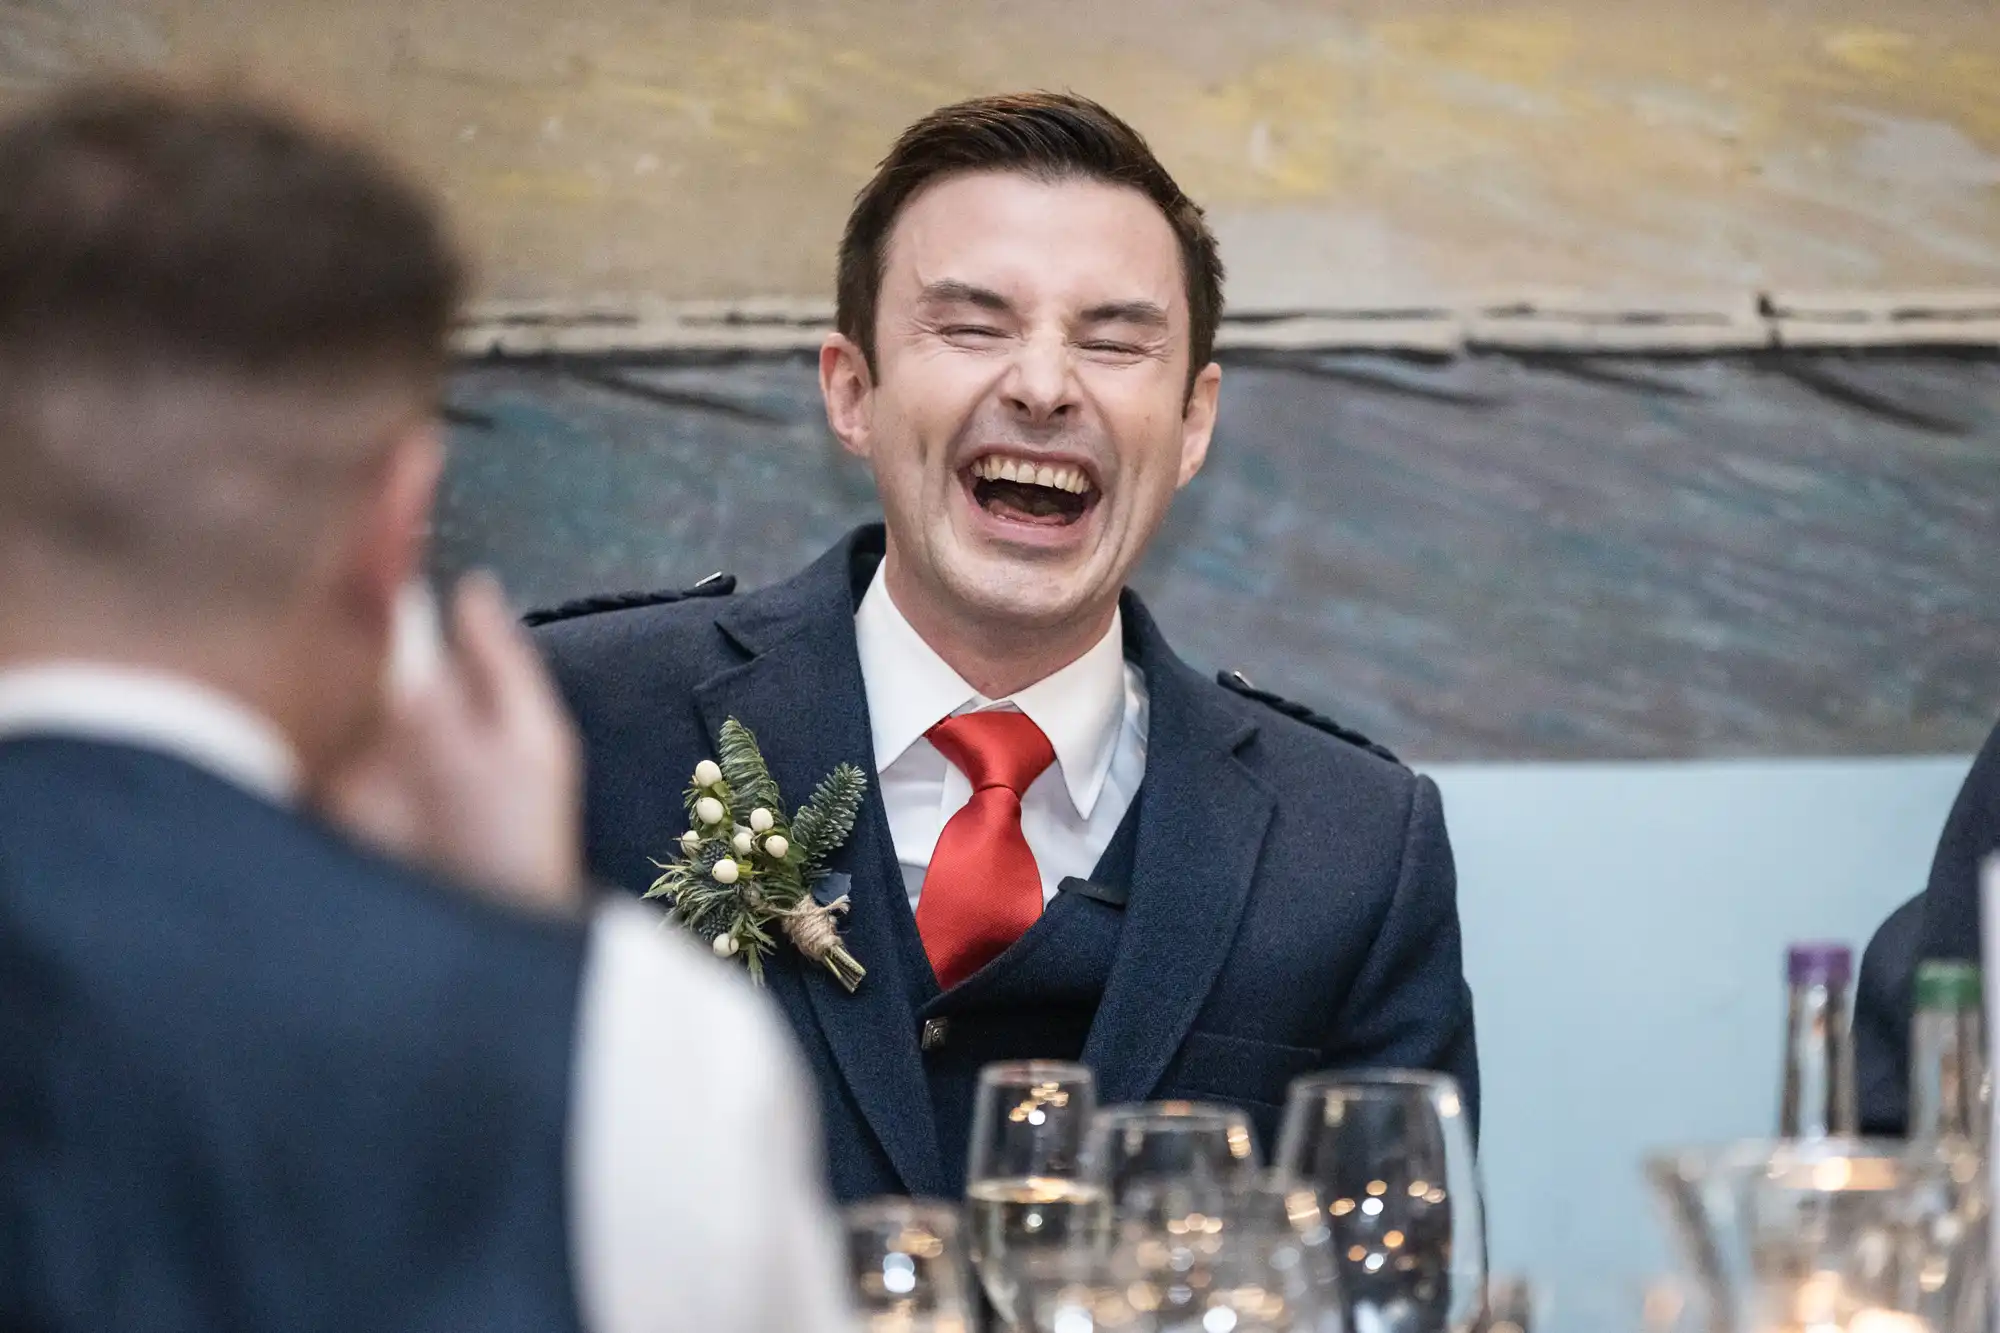 A man in a suit and red tie laughs heartily at a social event, with glassware visible on the table in front of him.